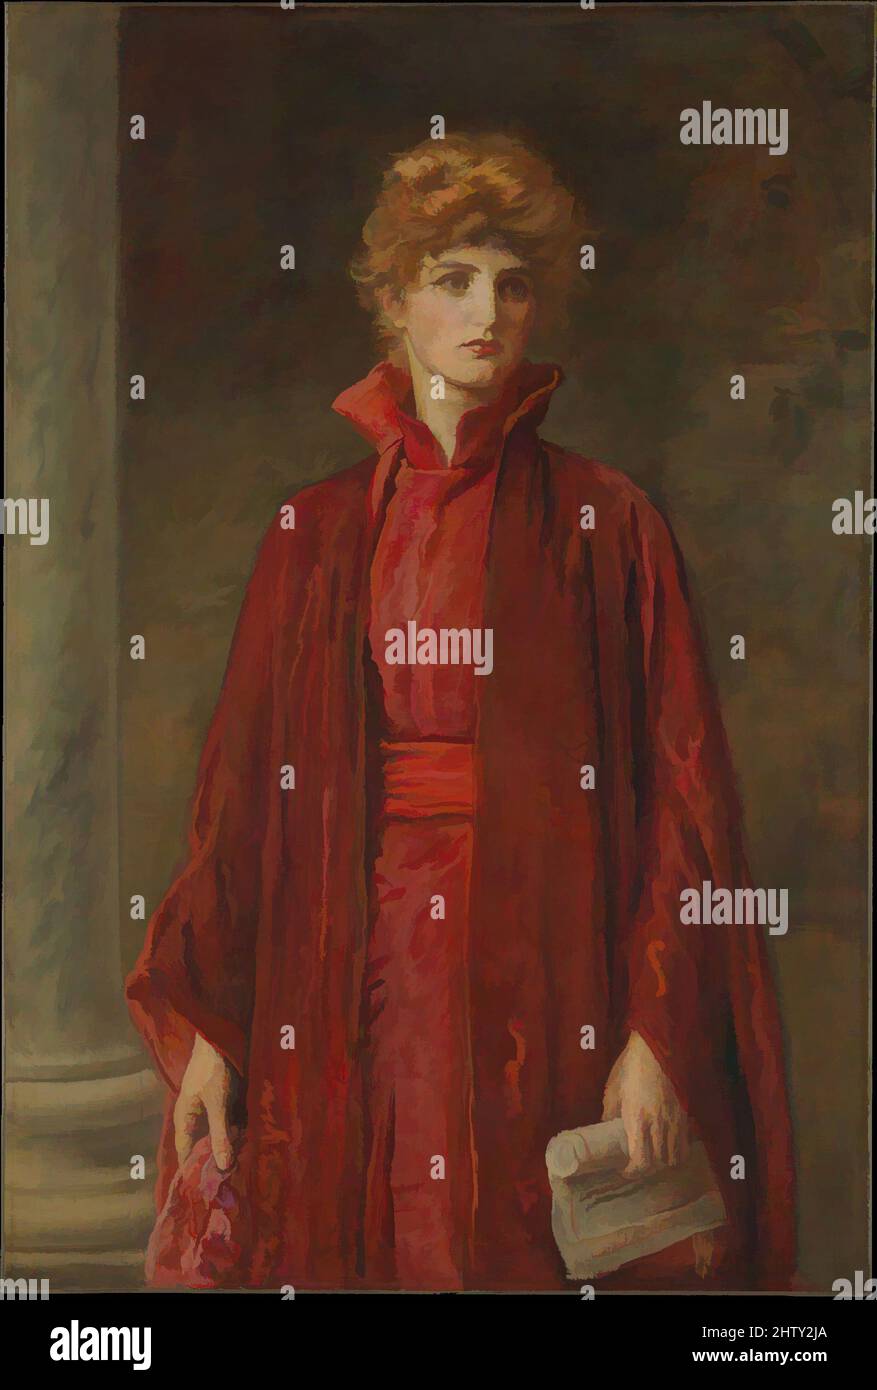 Art inspired by Portia, 1886, Oil on canvas, 49 1/4 x 33 in. (125.1 x 83.8 cm), Paintings, Sir John Everett Millais (British, Southampton 1829–1896 London), Millais is best known as one of the artists who founded the Pre-Raphaelite Brotherhood in 1848. As a result of what have been, Classic works modernized by Artotop with a splash of modernity. Shapes, color and value, eye-catching visual impact on art. Emotions through freedom of artworks in a contemporary way. A timeless message pursuing a wildly creative new direction. Artists turning to the digital medium and creating the Artotop NFT Stock Photo